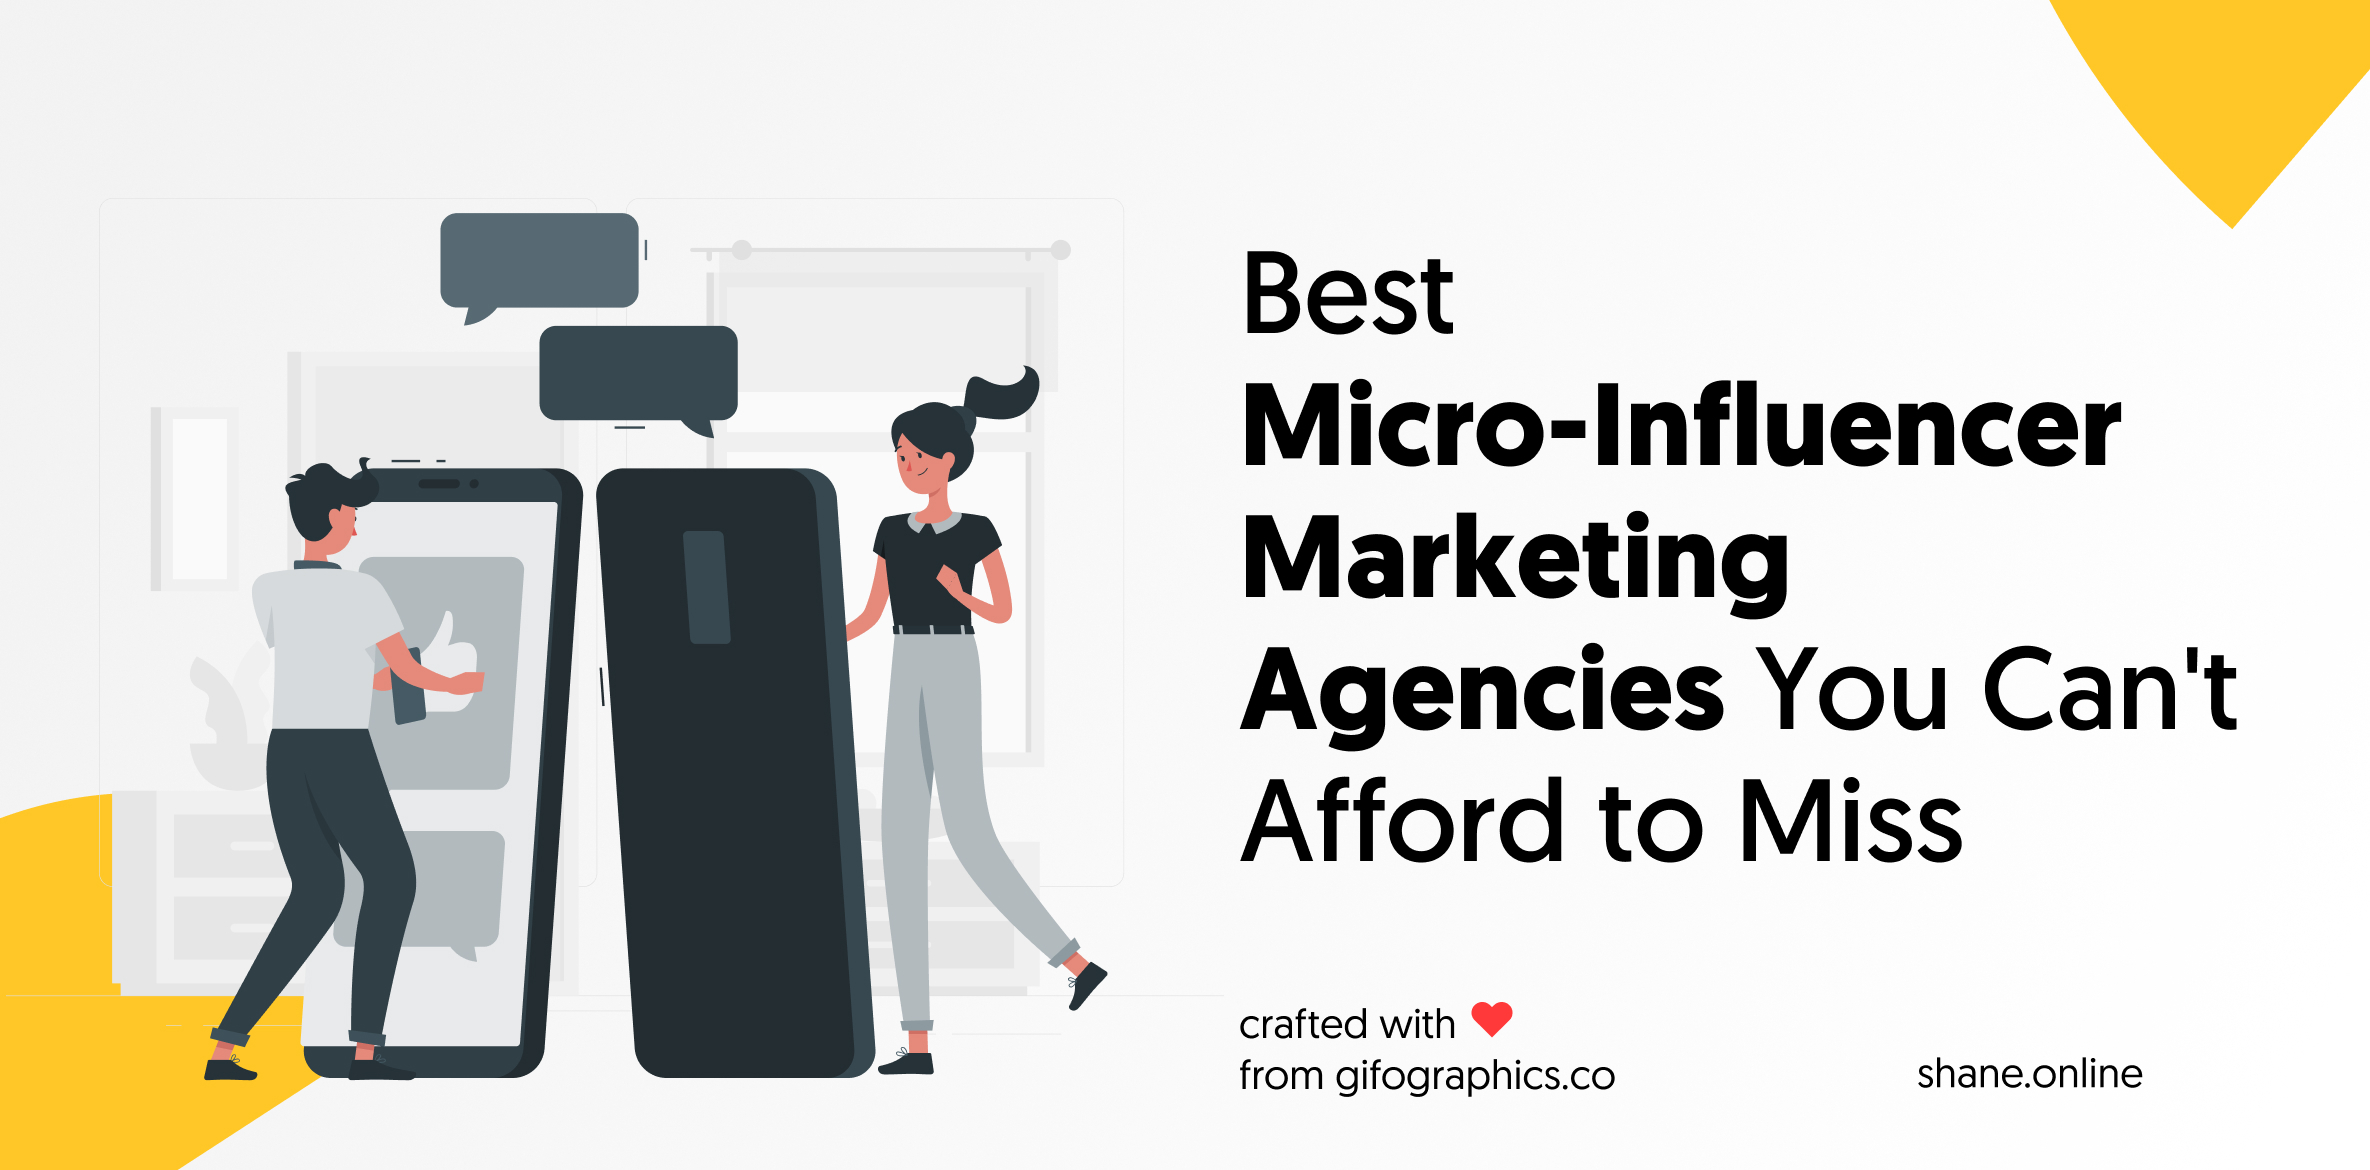 Best Micro-Influencer Marketing Agencies You Can't Afford to Miss